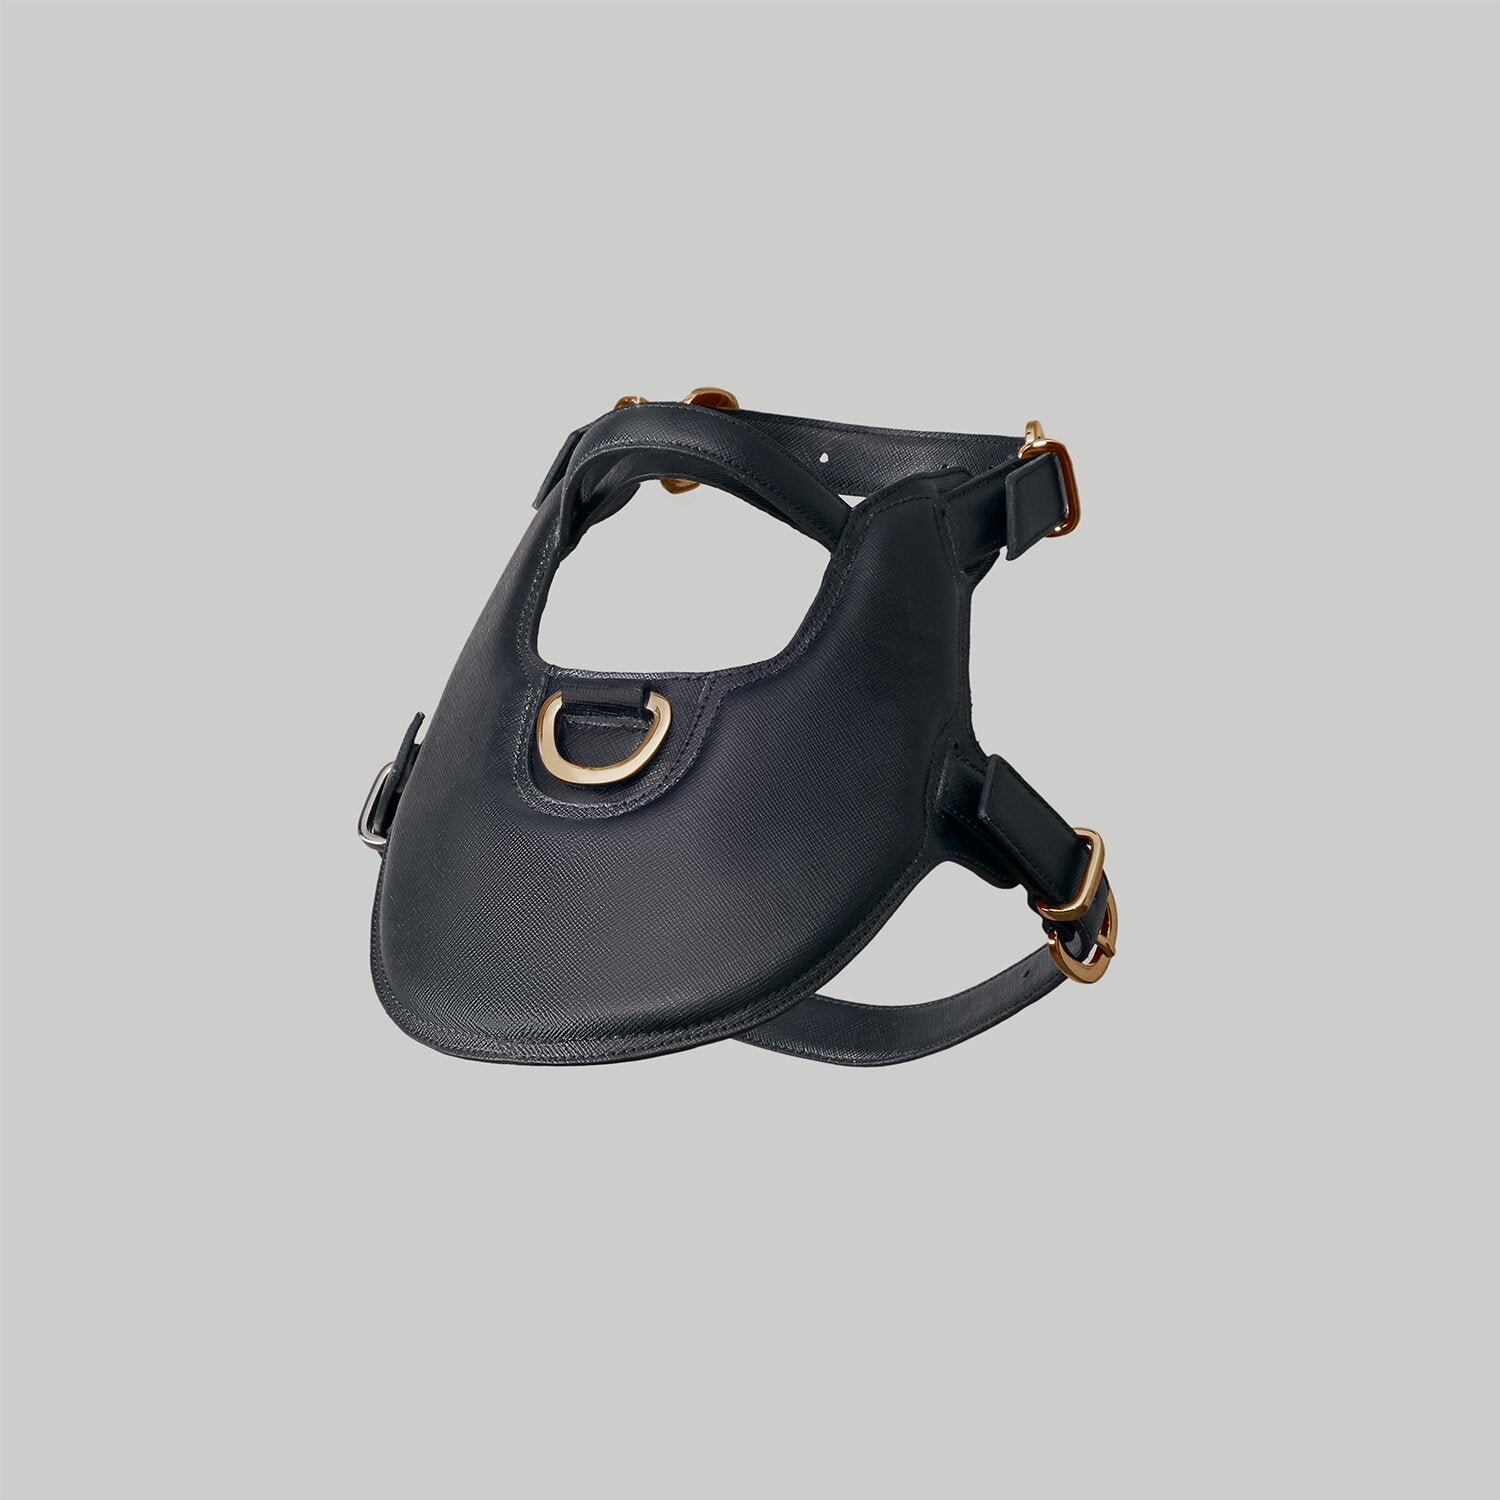 Luxury dog harness in black Saffiano leather with Gold